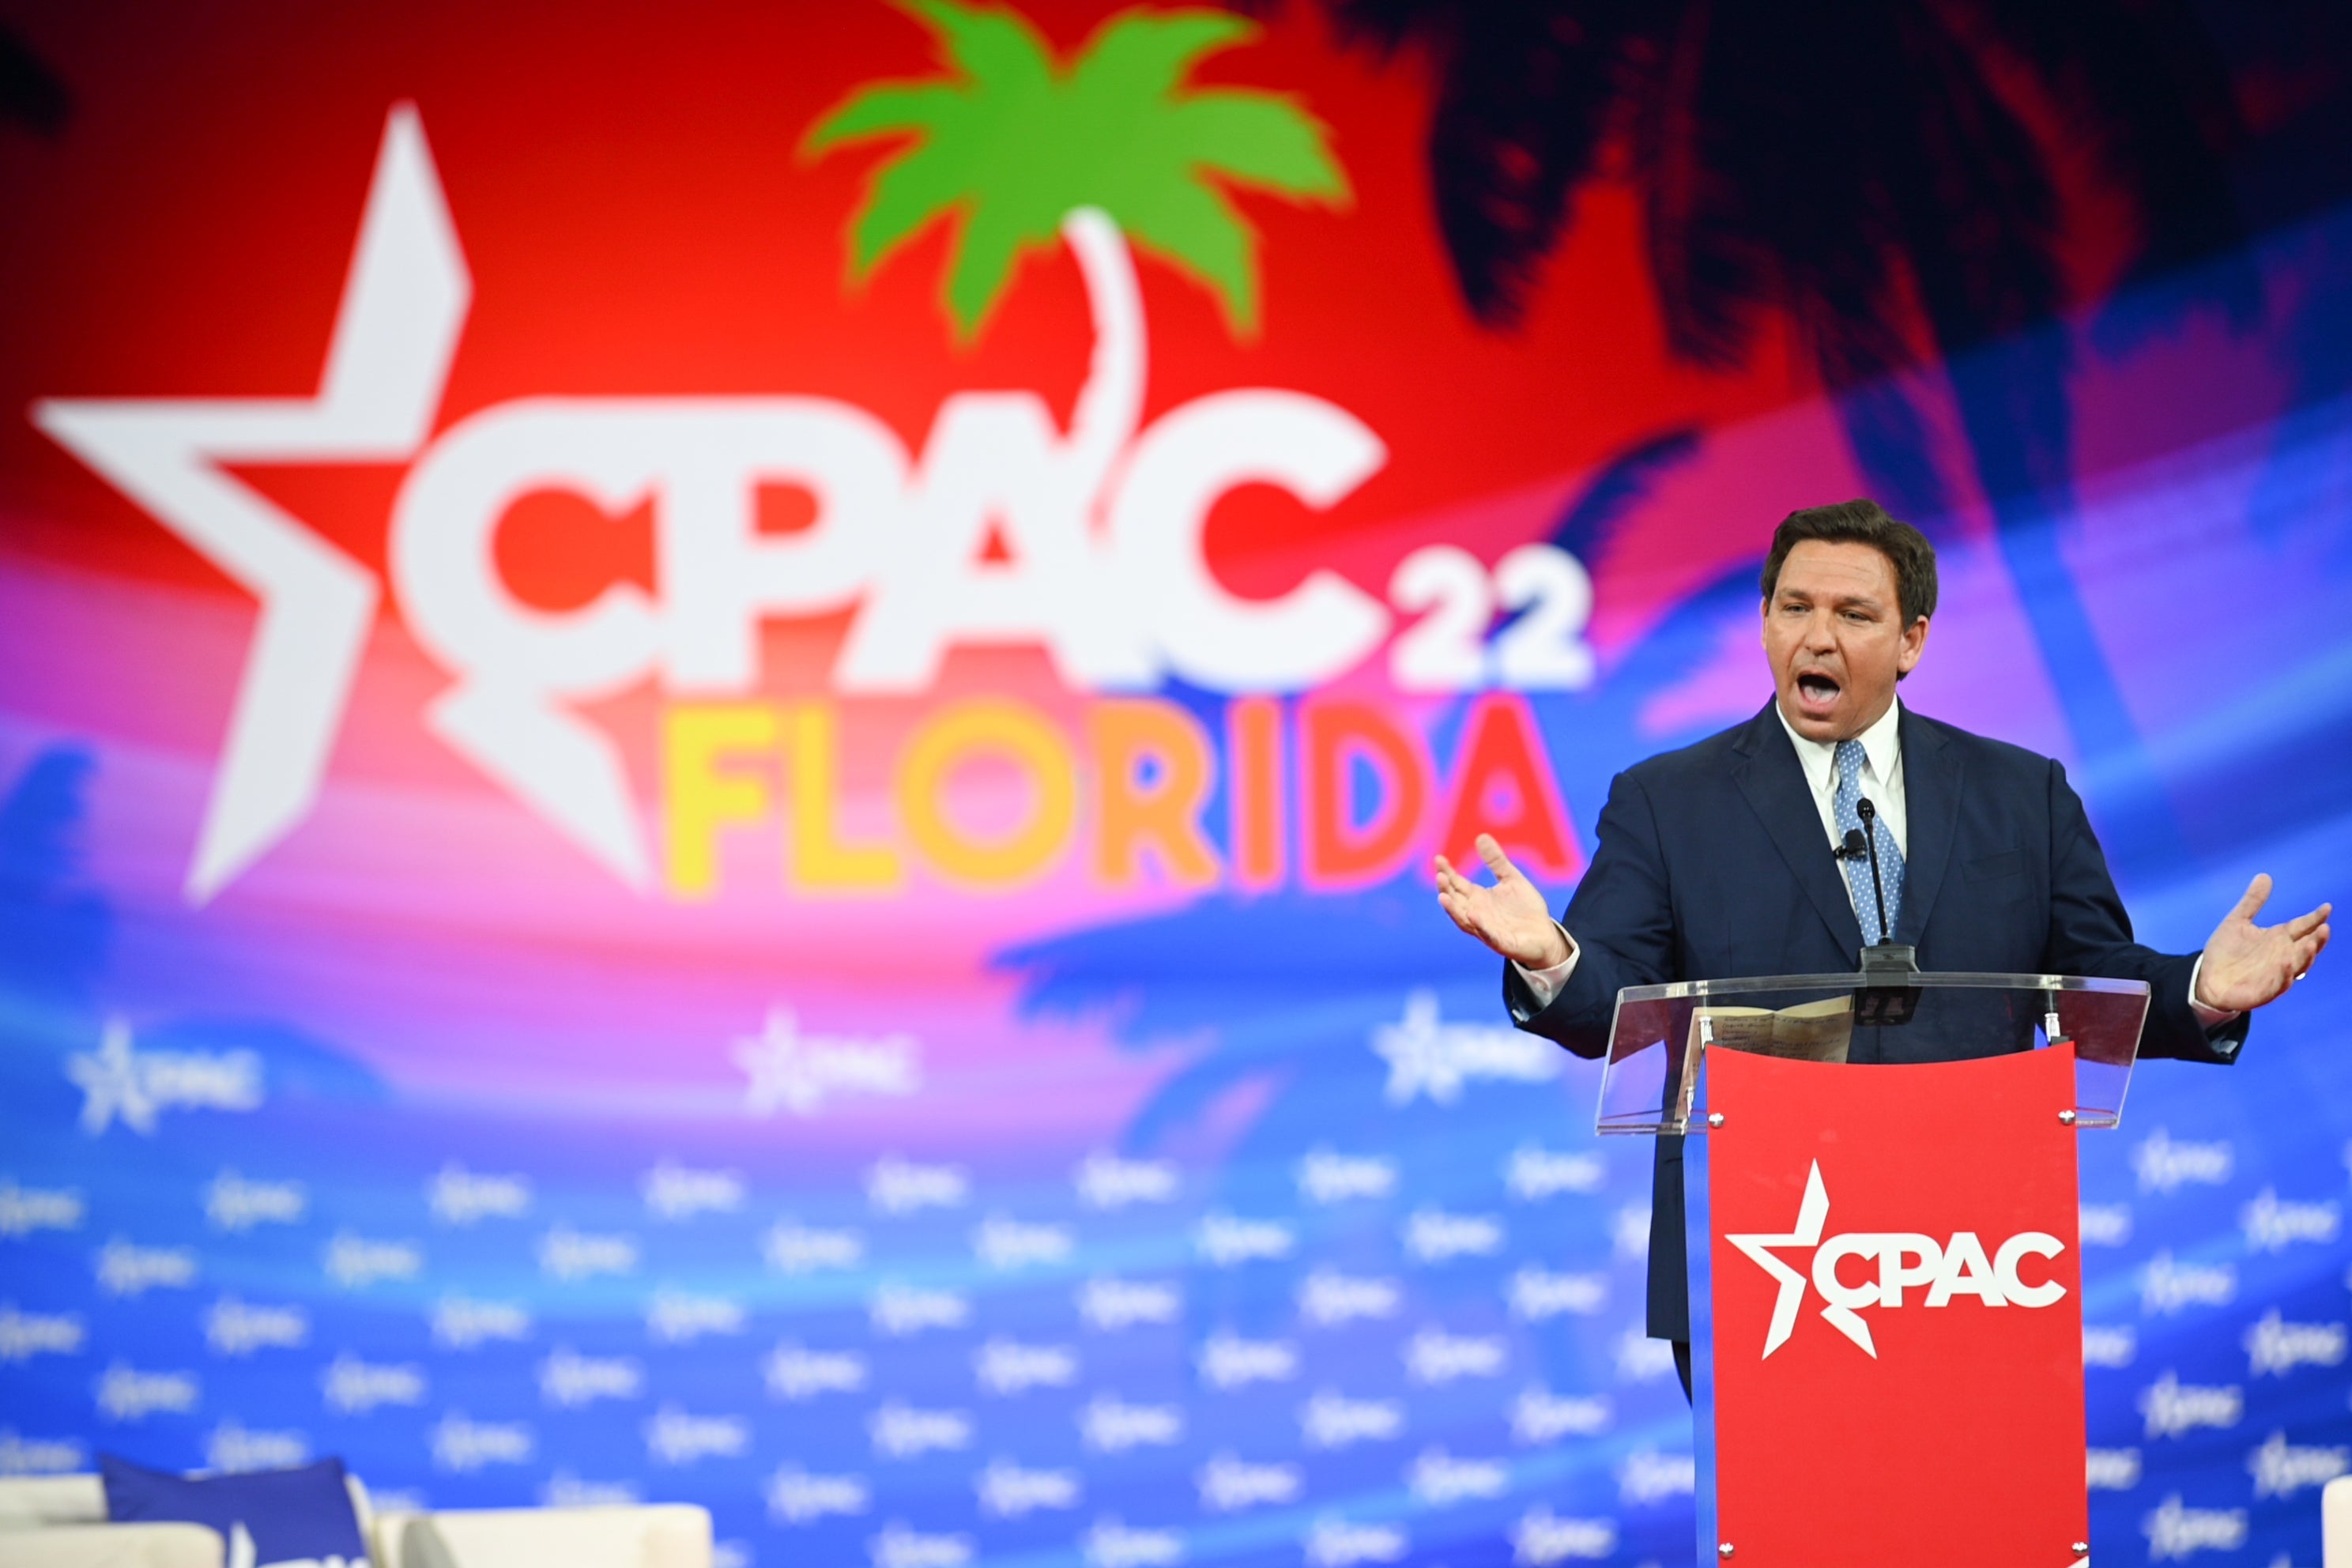 DeSantis gestures as he speaks at a lectern with a tropical CPAC backdrop behind him